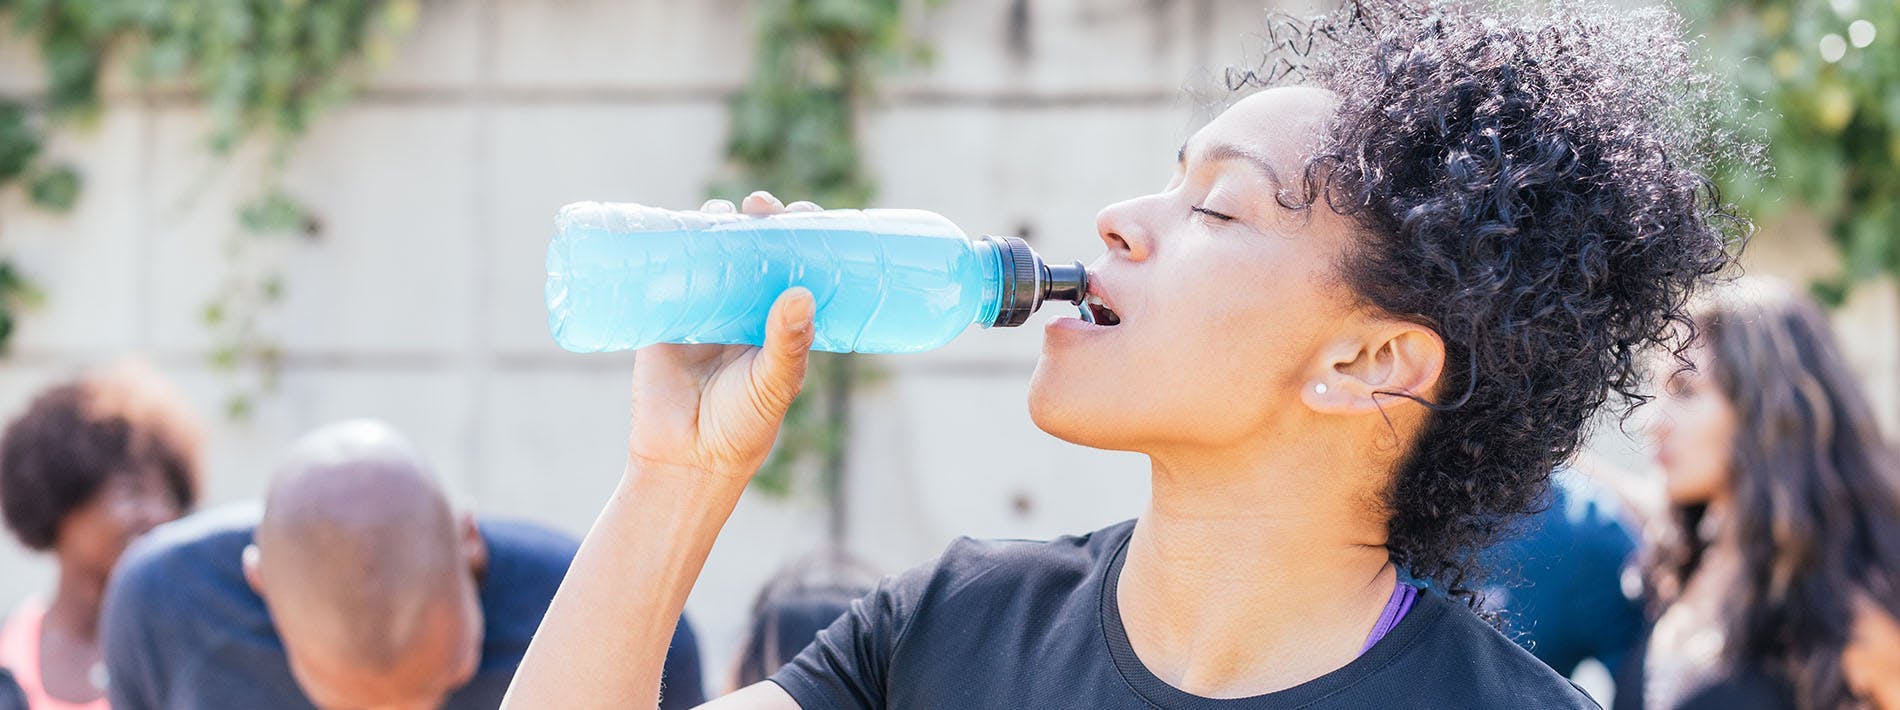 Understanding Dehydration: Is It as Simple as Drinking More Water?